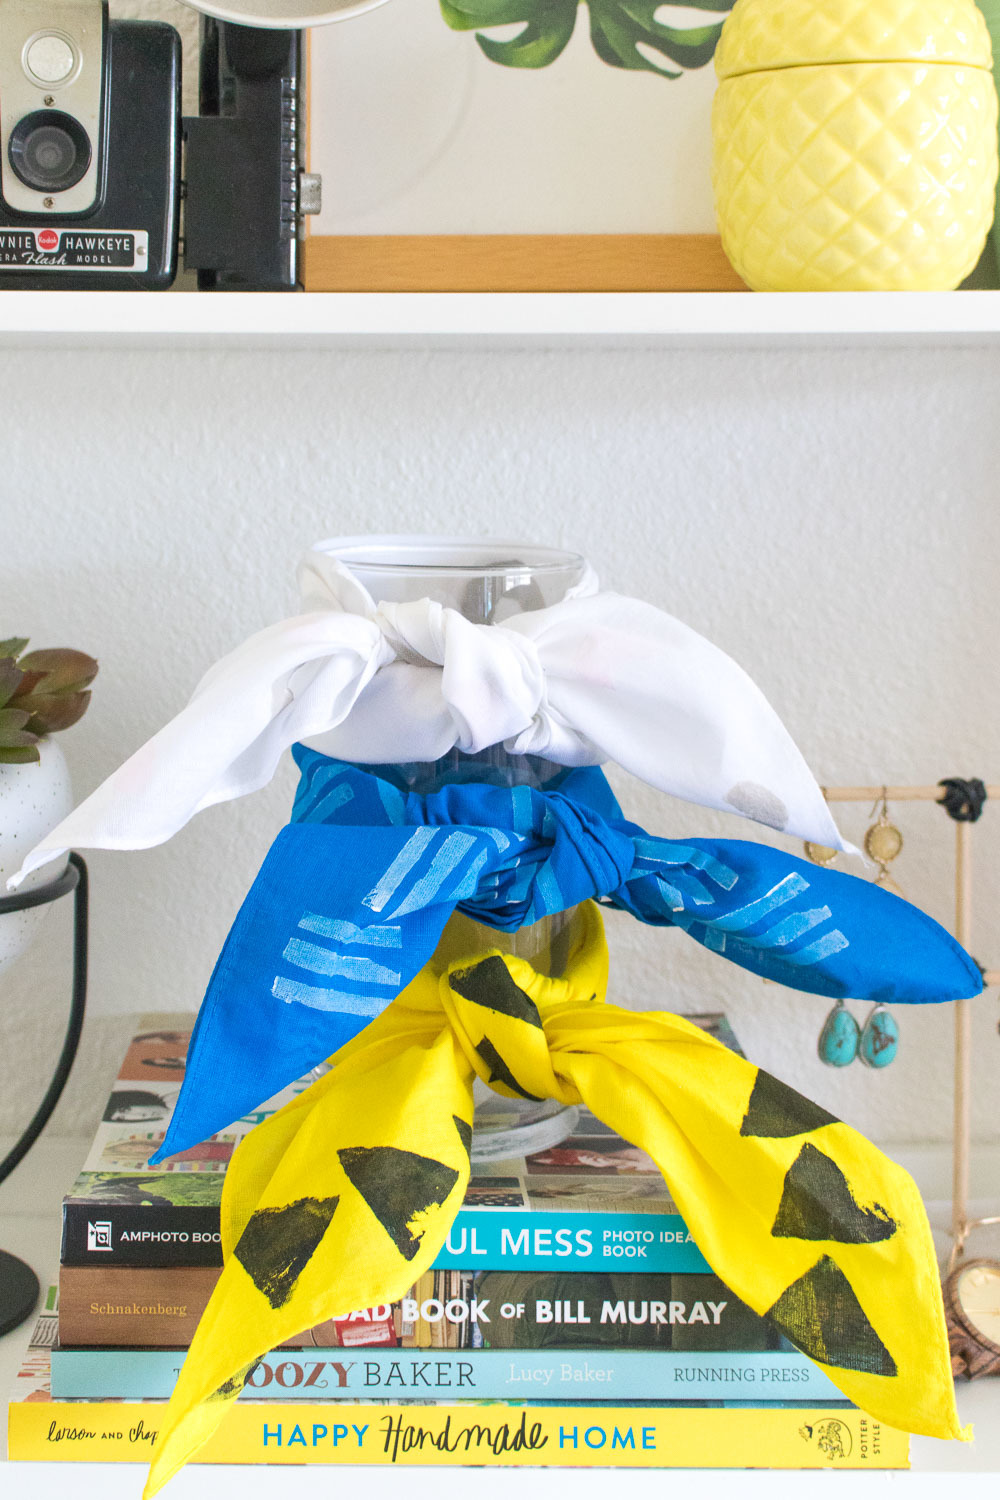 Three pieces of cloth tied around a glass vase, one white, one blue and one yellow and black all sitting on top of a pile of books.